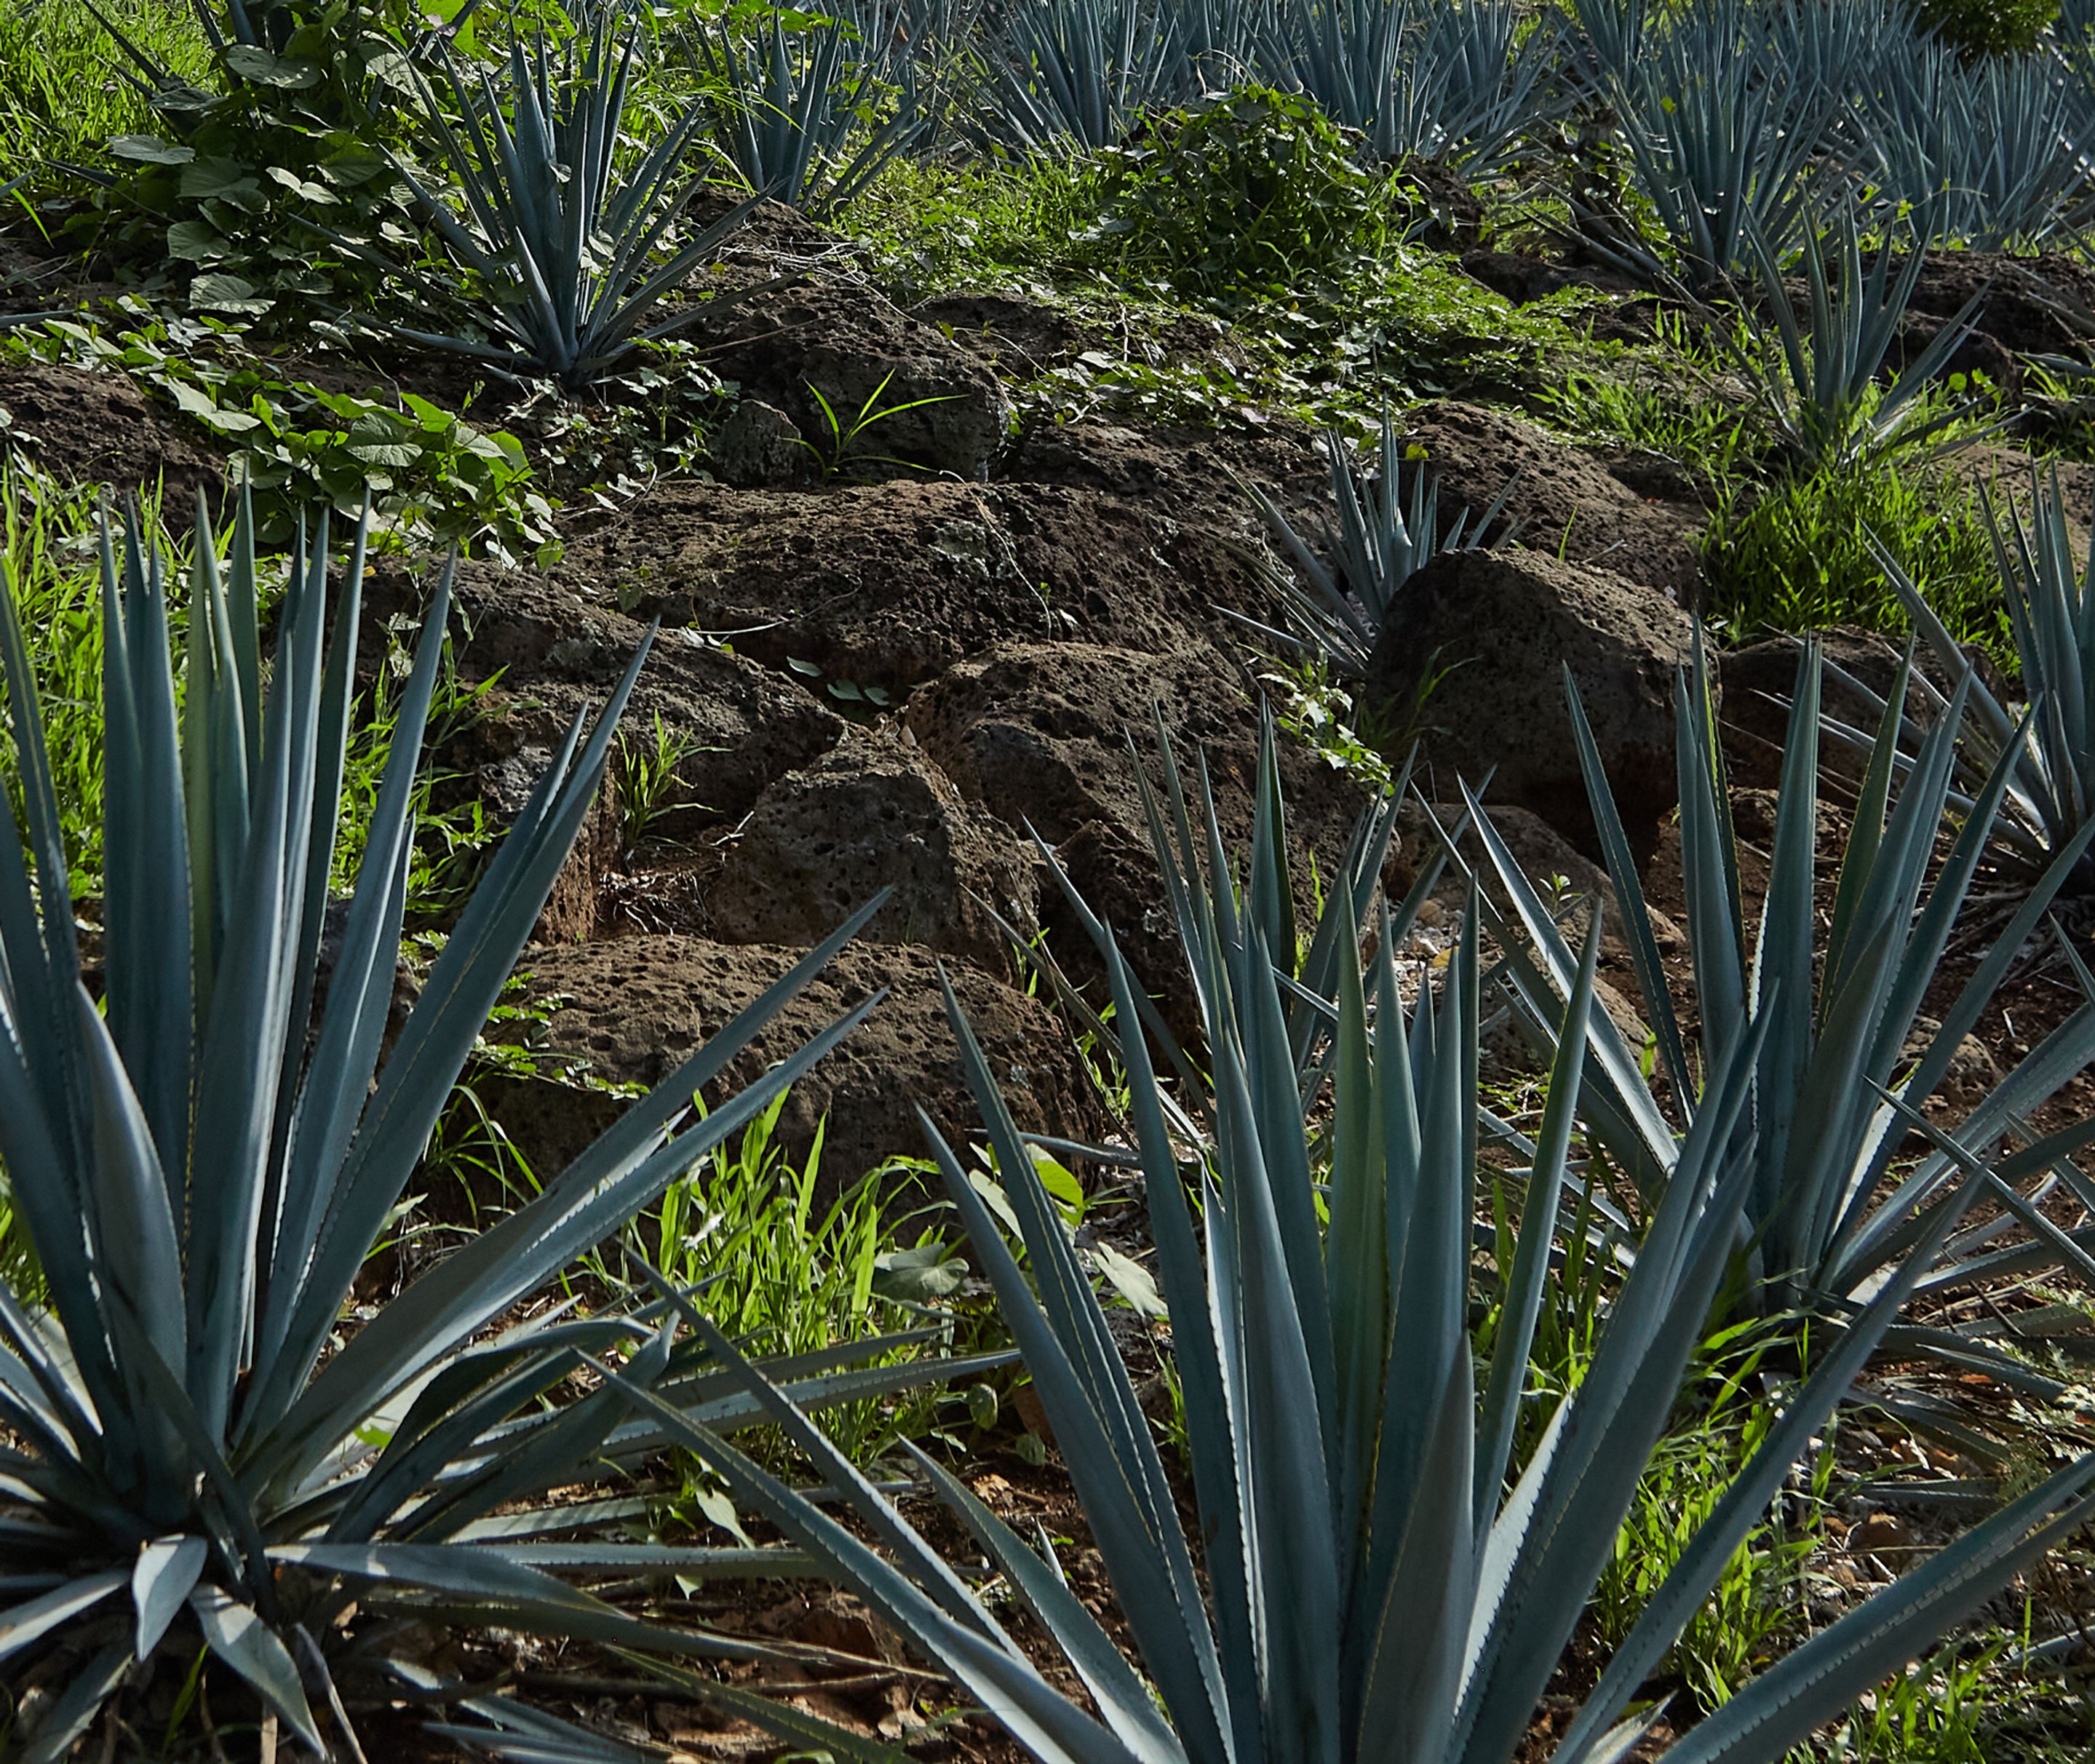 The storied history of Celaya Tequila begins in Mexico, on the porch of a rural Sonora ranch in the late 1800s. Much has changed since the first Celaya made tequila, but our dedication to the craft remains the same.